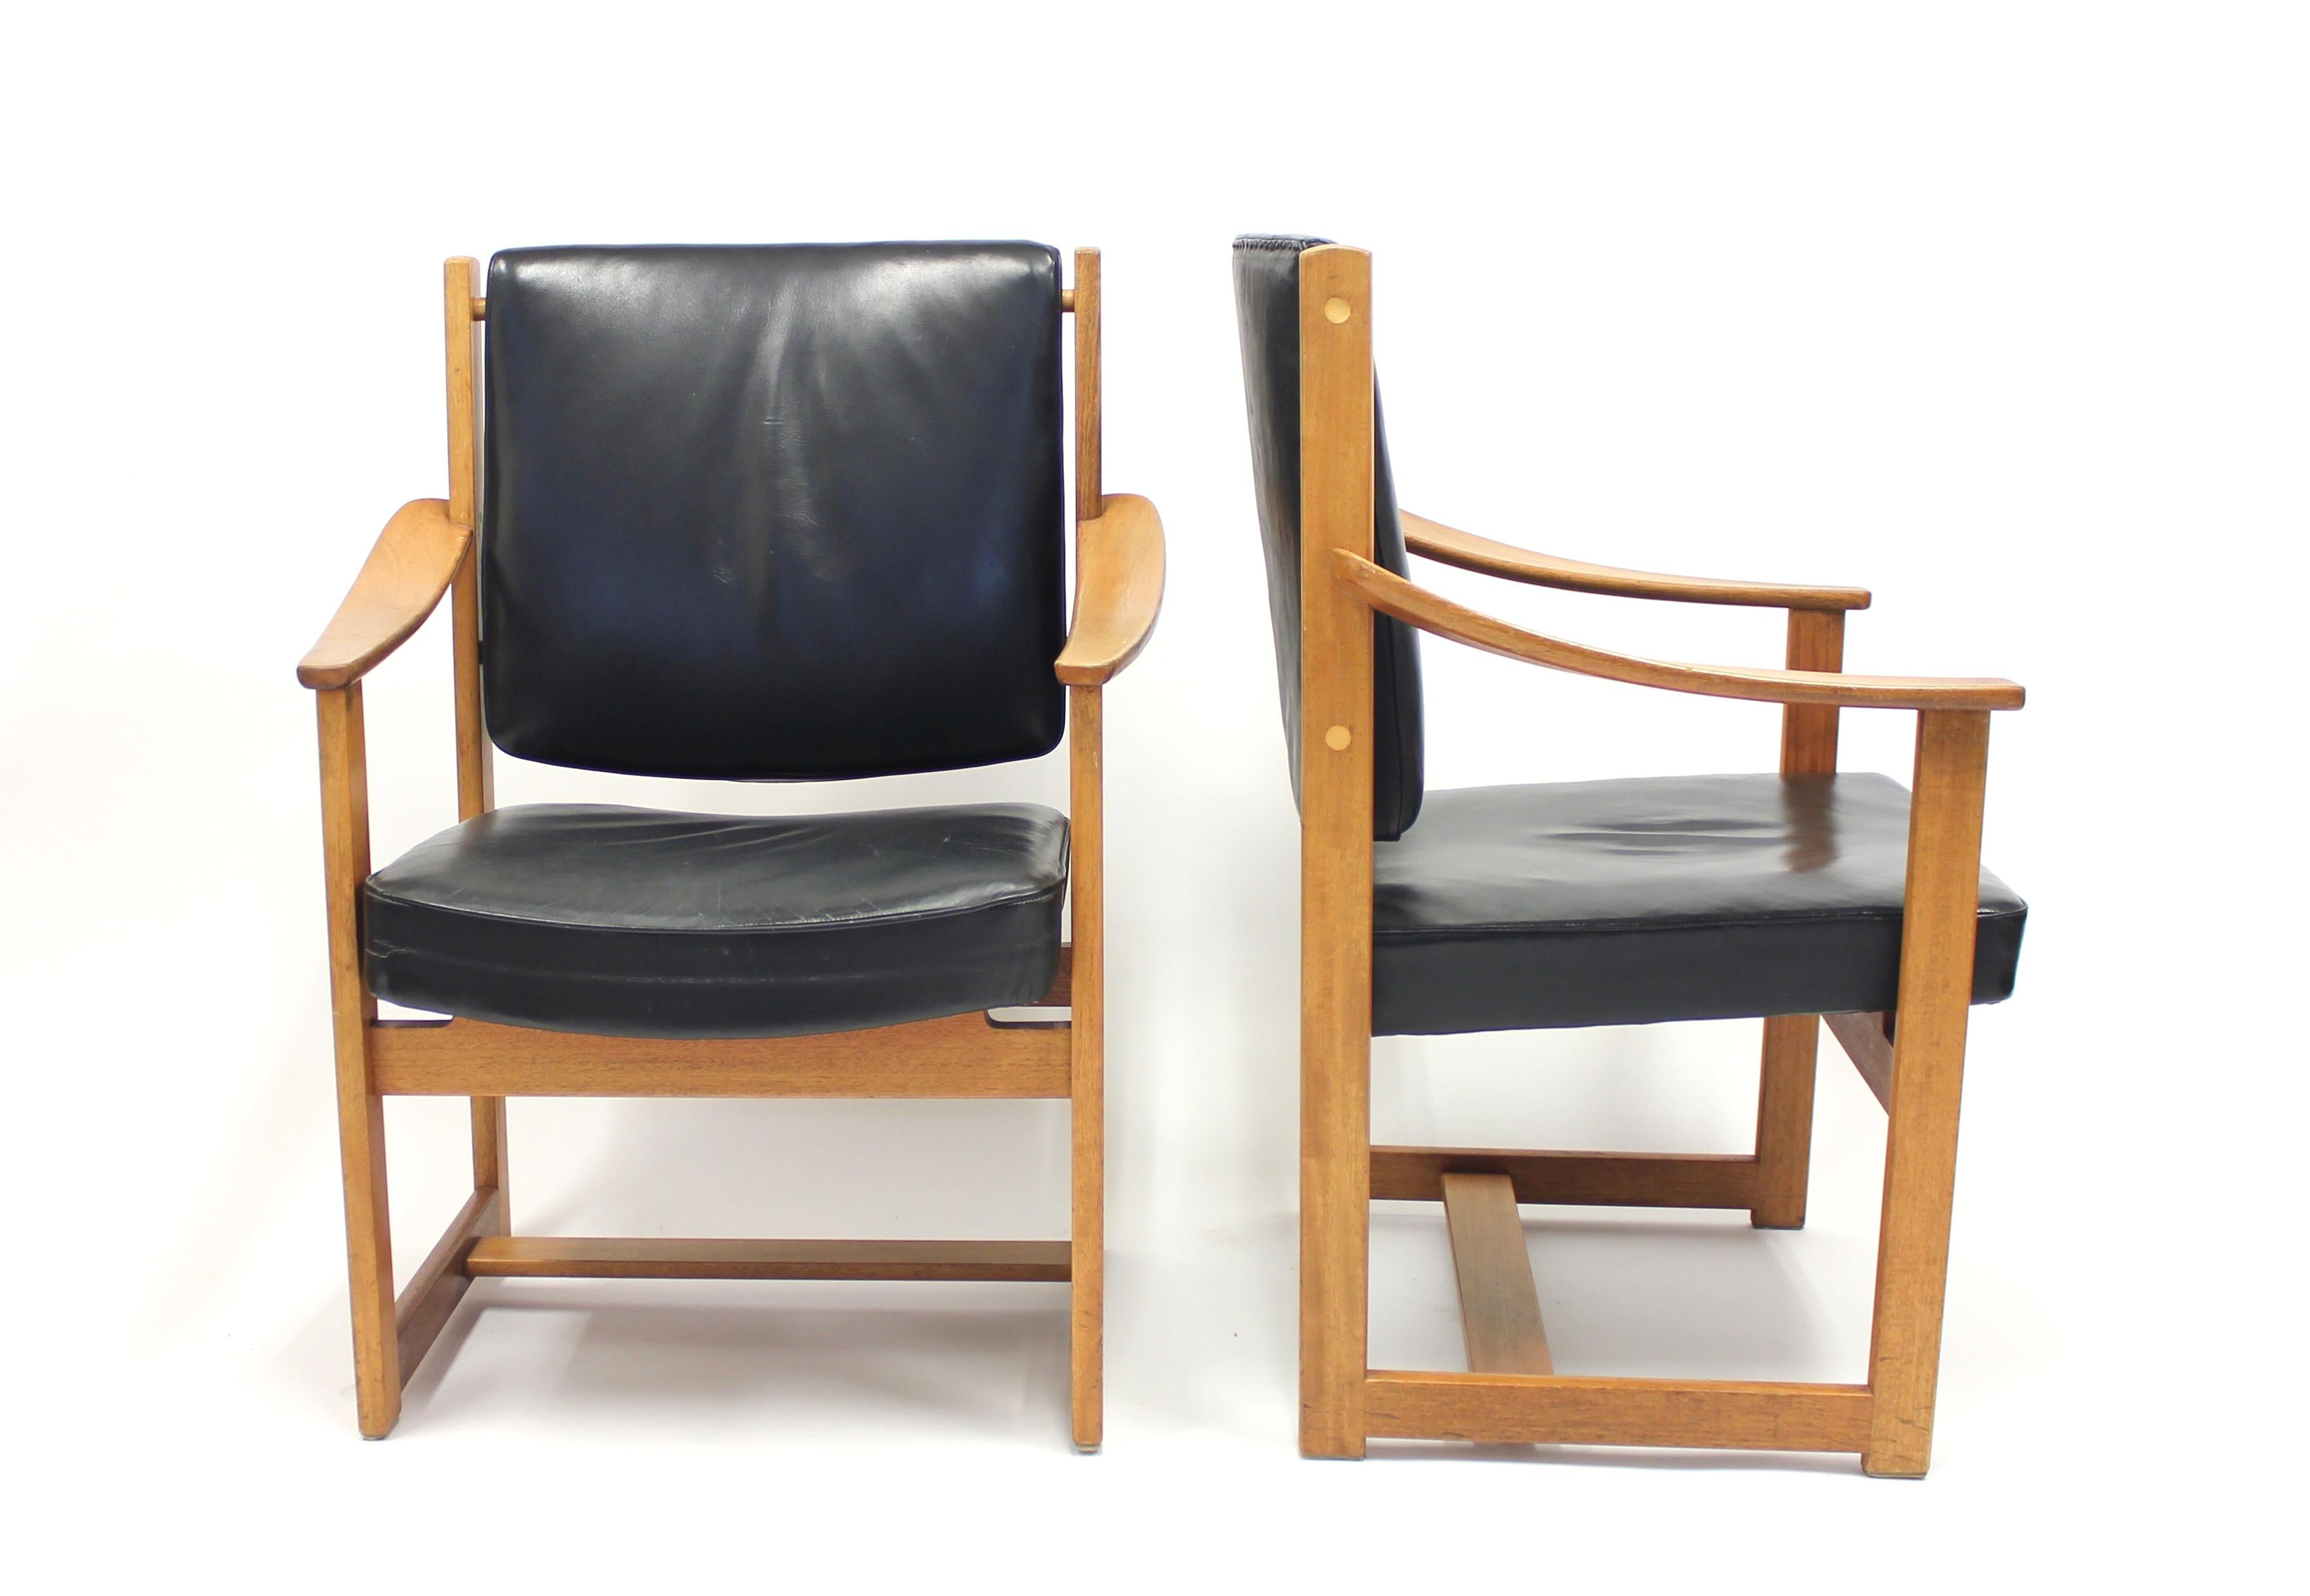 This pair of chairs were designed especially for the head office of The Swedish Engineering Compound (Sveriges Verkstadsförening) in Stockholm in the early 1960s. Anders Tengbom was the architect for the, quite well documented, building and some of